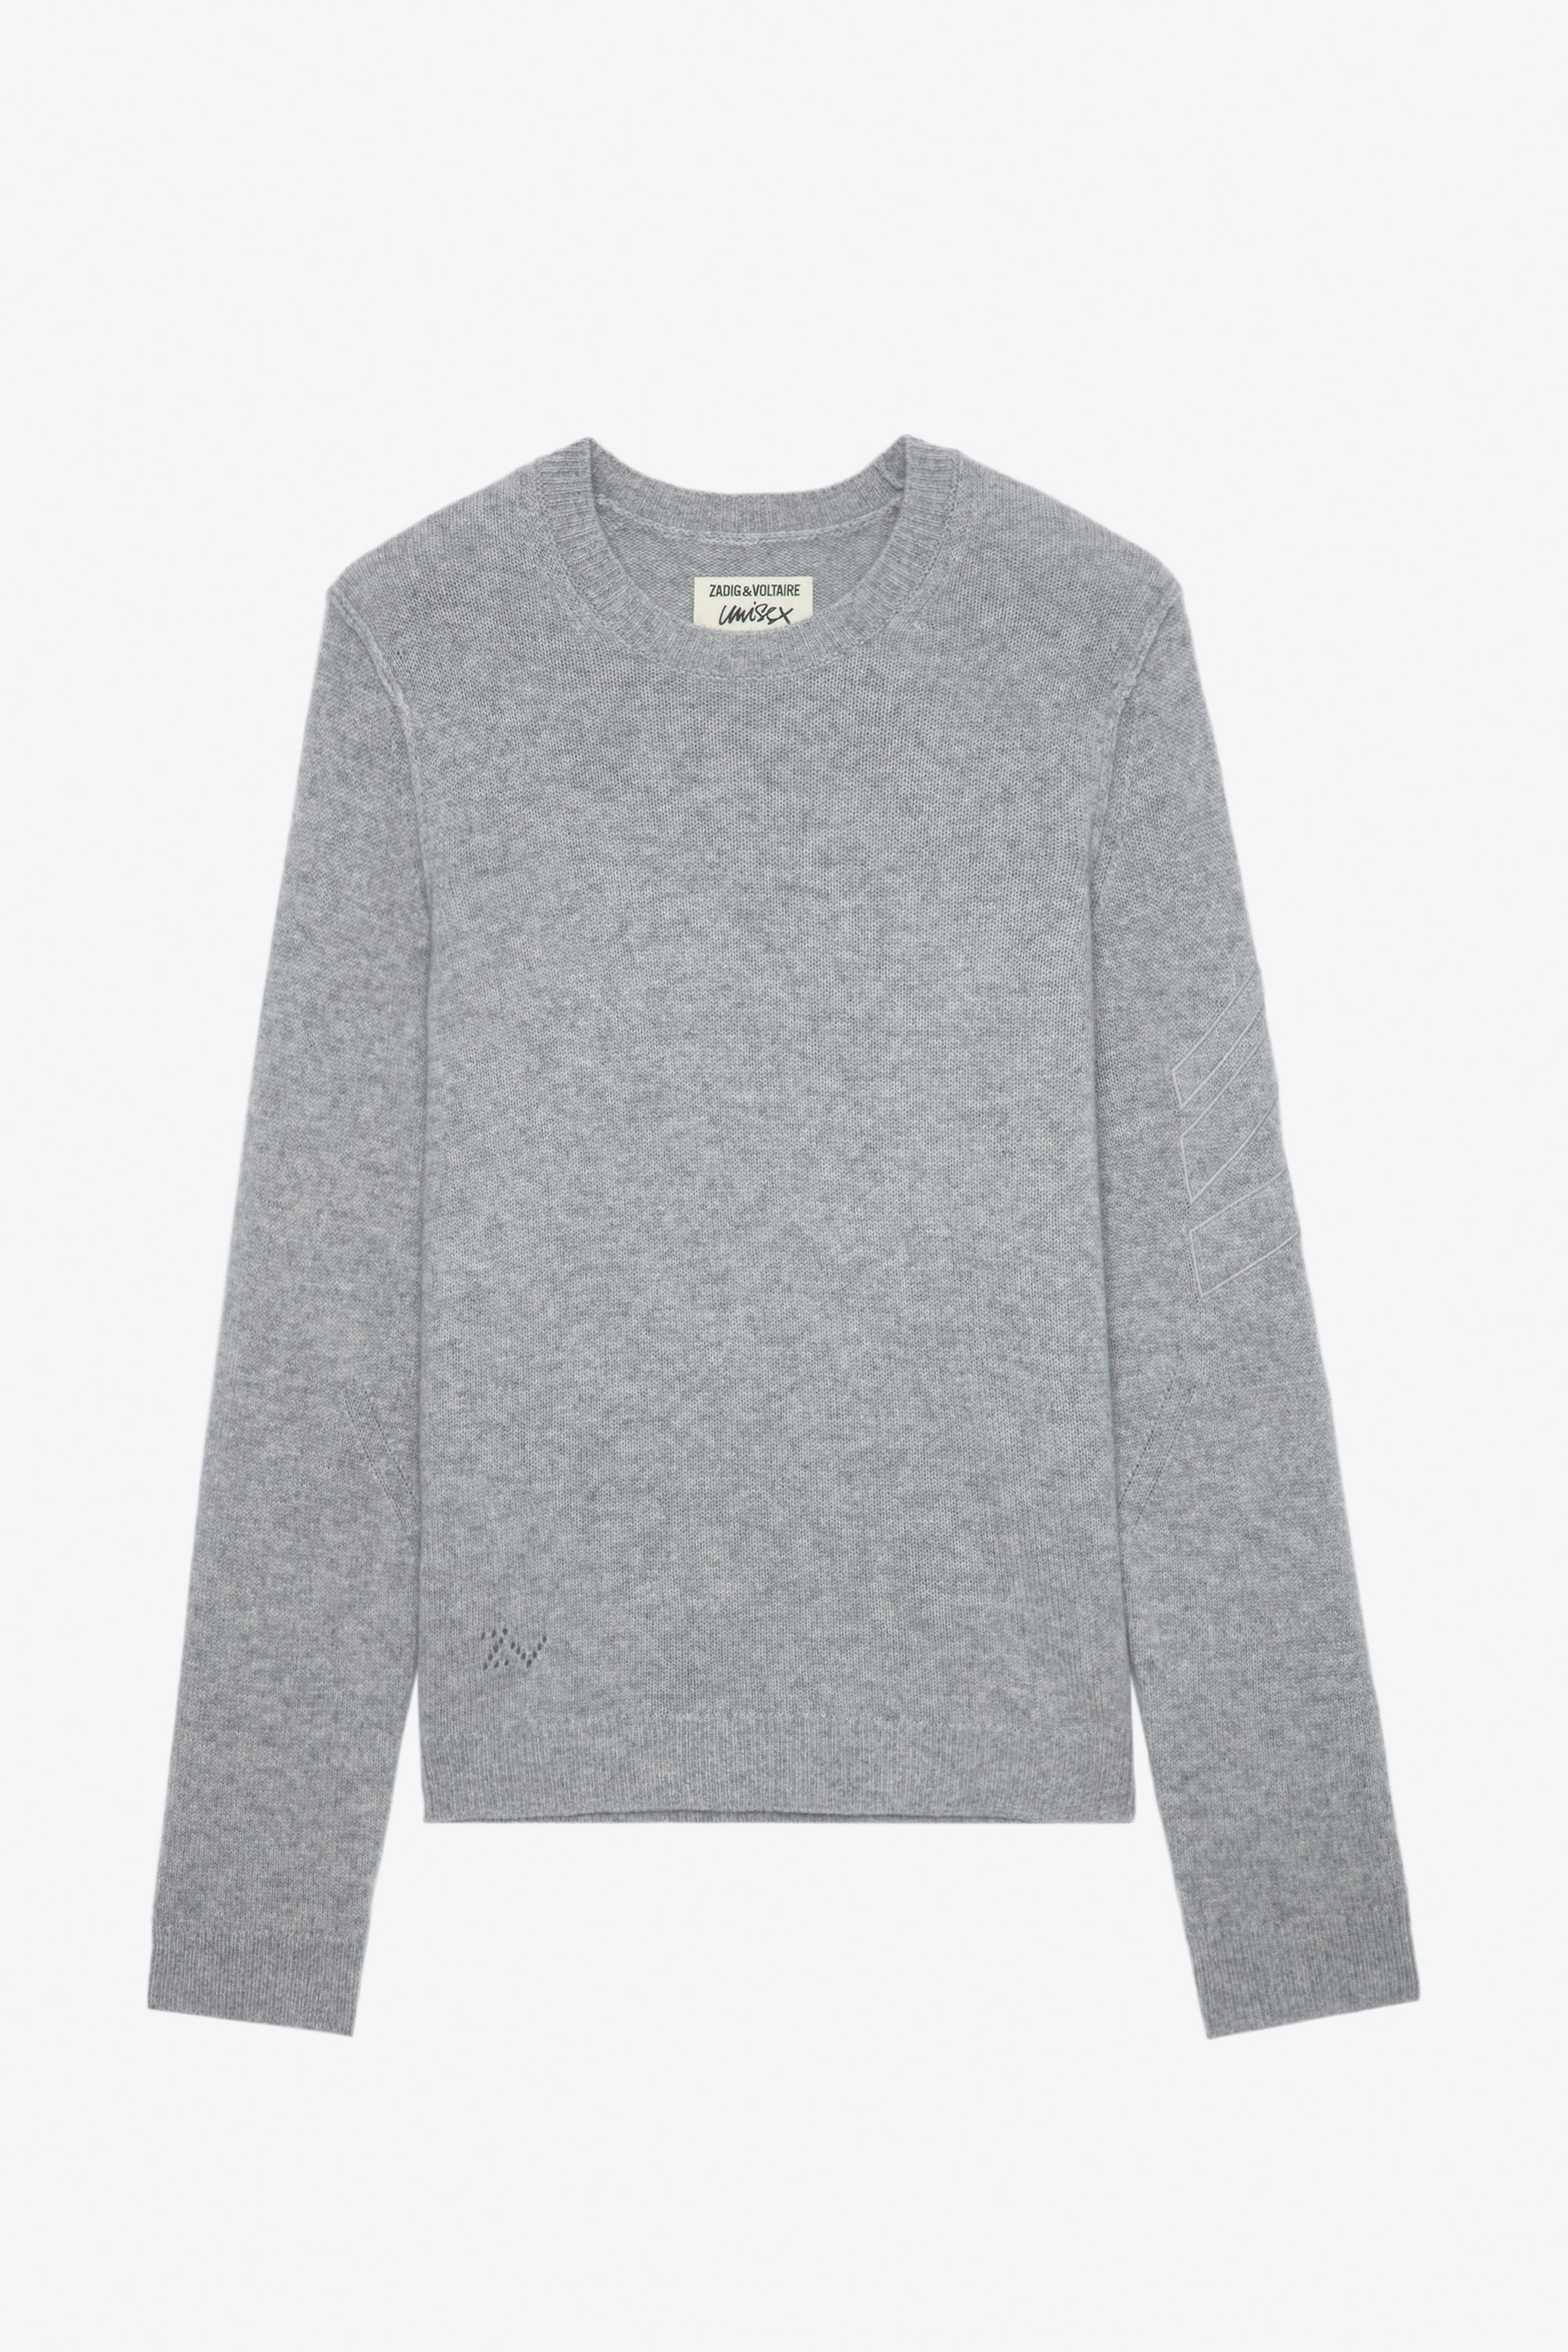 Kennedy Cashmere Jumper - Unisex's light marl grey cashmere jumper with arrows on the sleeve.